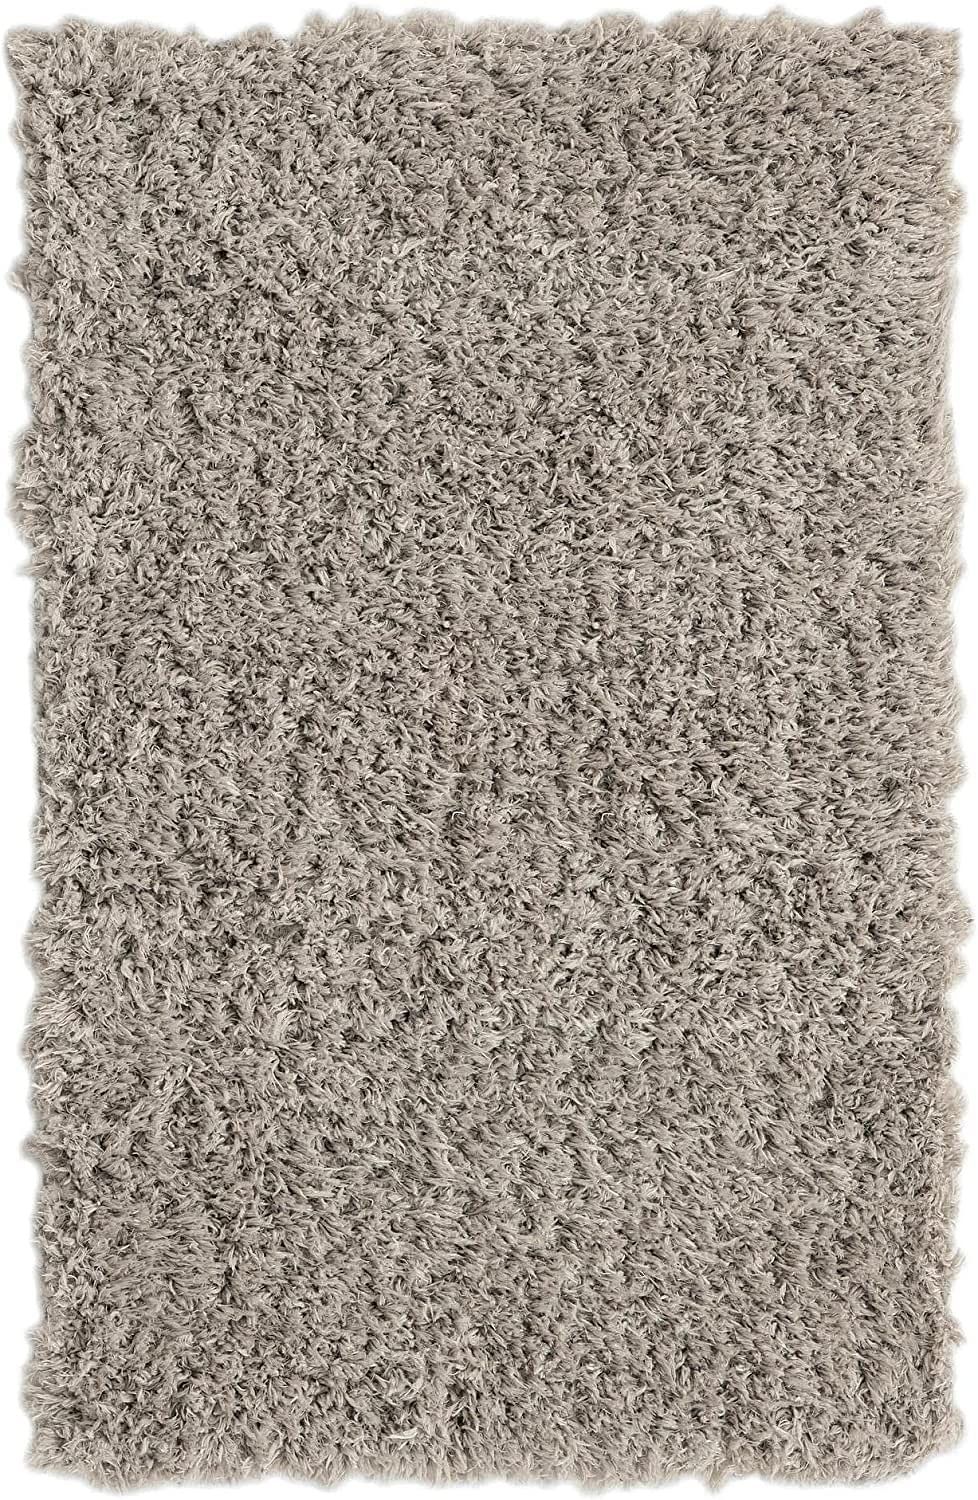 Rugs Infinity Collection Solid Shag Area Rug – | Ubuy India With Ash Infinity Shag Rugs (View 8 of 15)